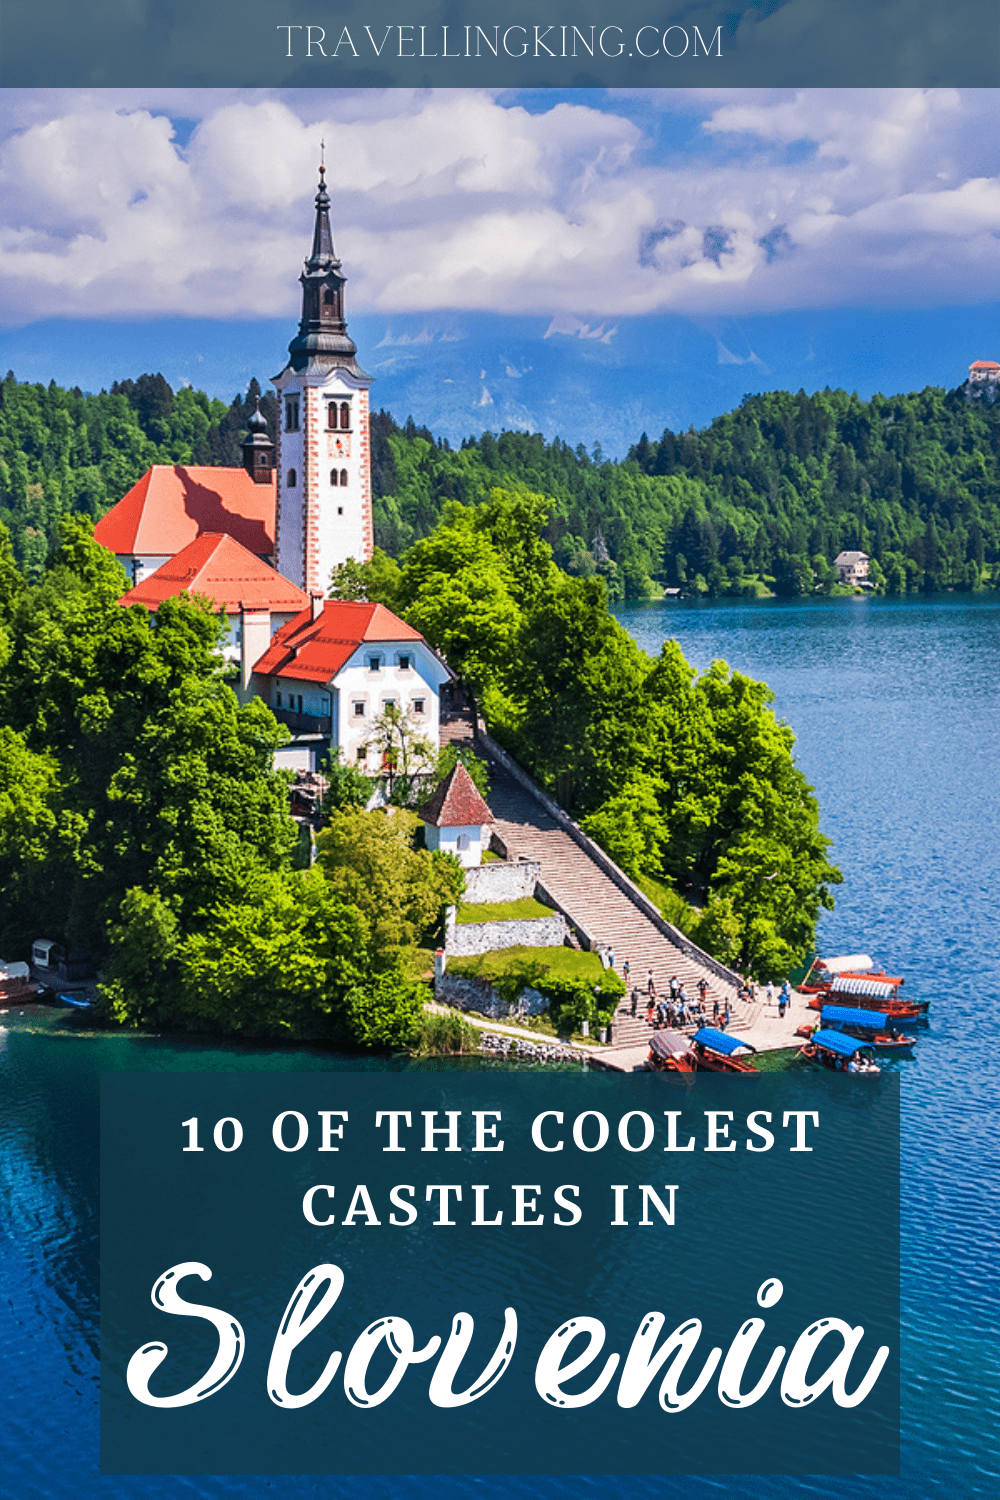 10 of the Coolest Castles in Slovenia